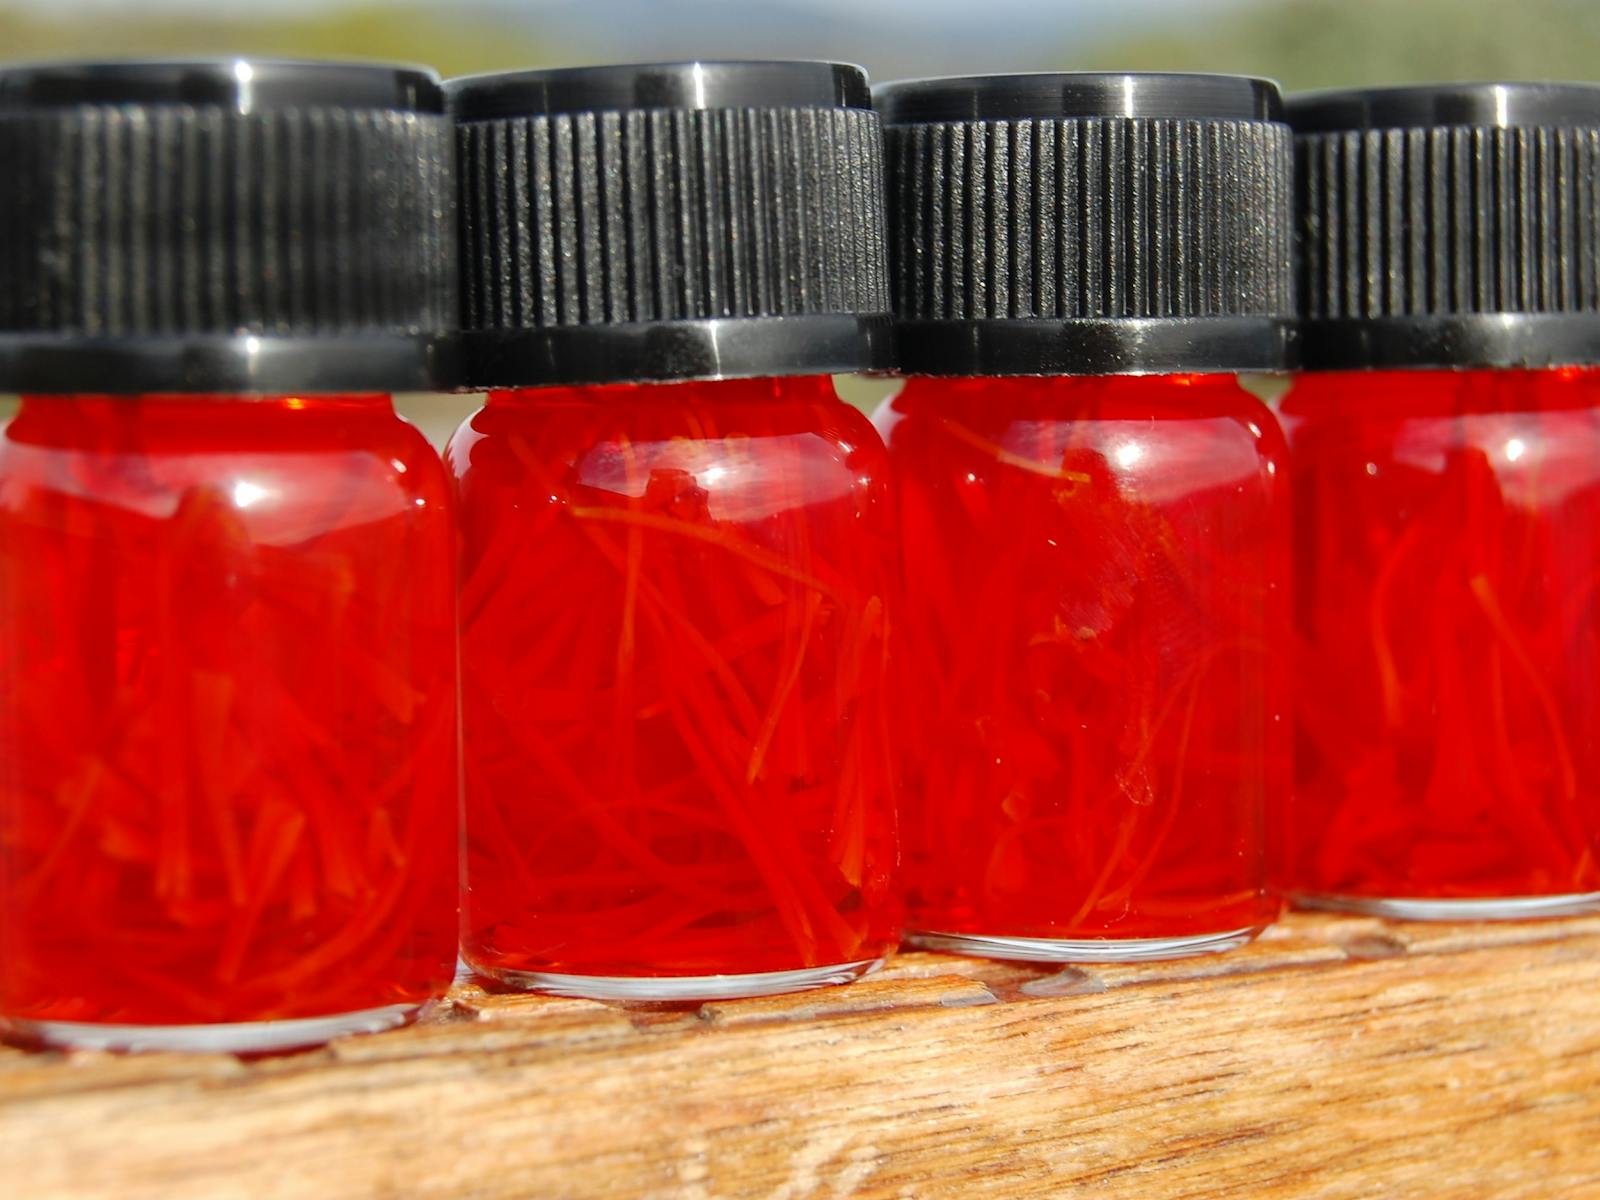 Four bottles of saffron infused in water for 24 hours showing bright red colour